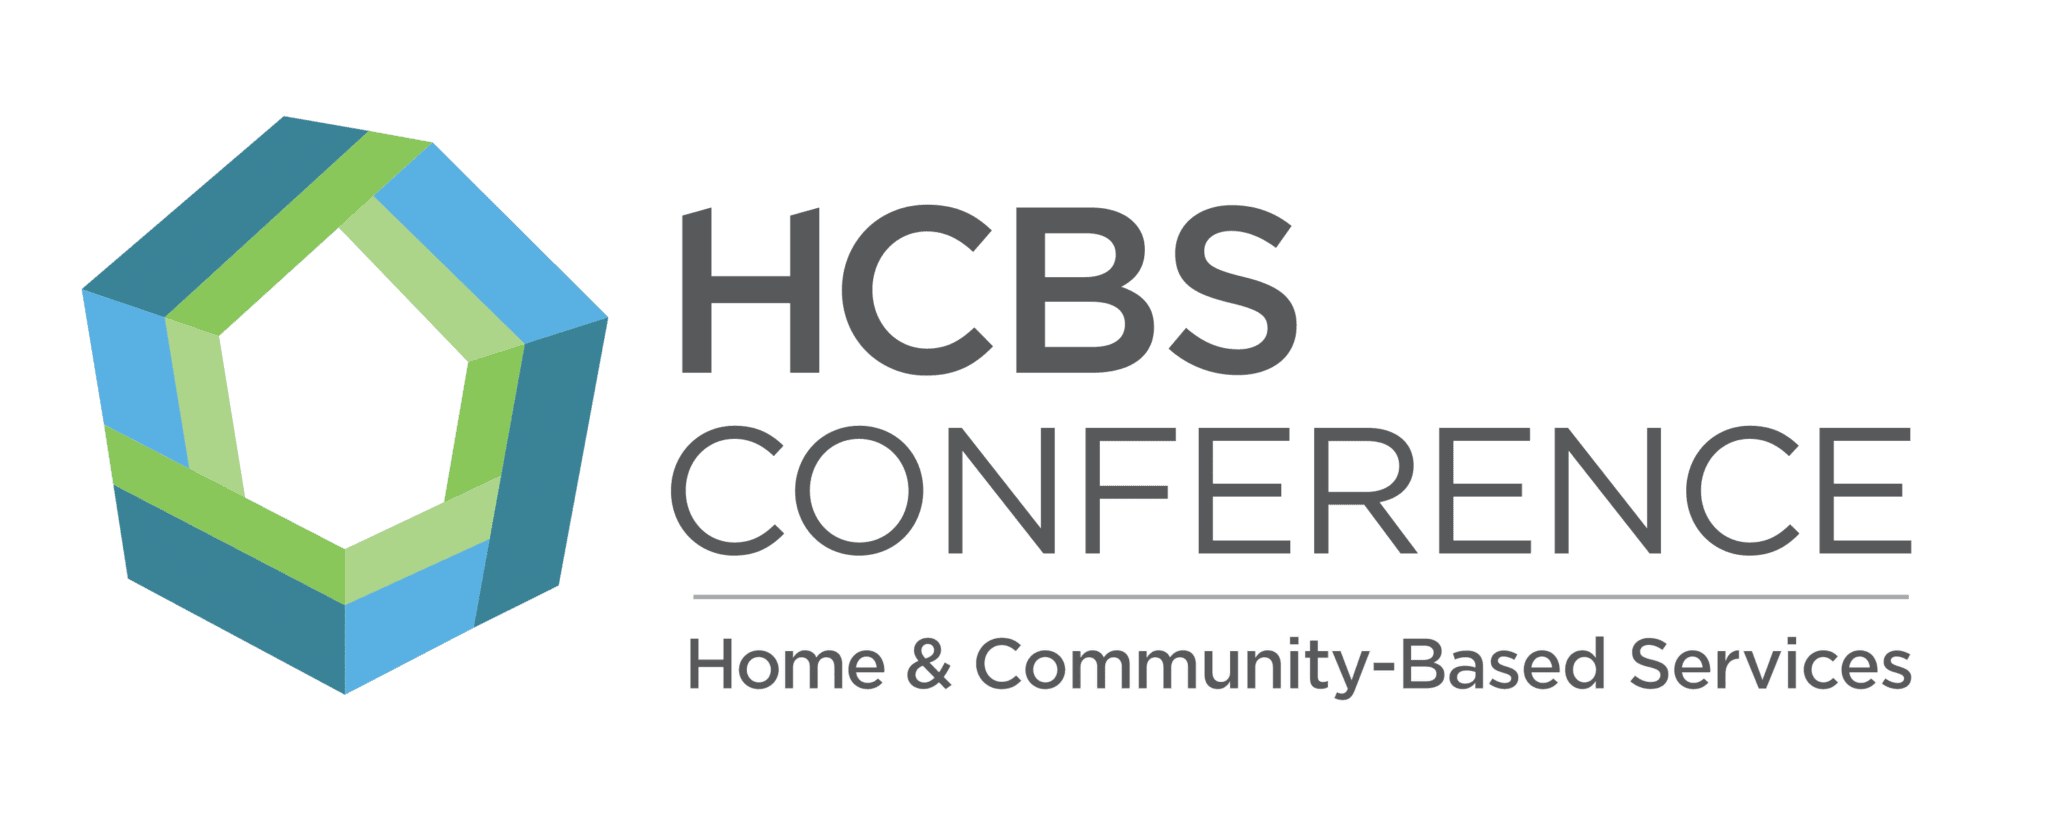 HCBS Virtual Conference MediSked, a CaseWorthy Company